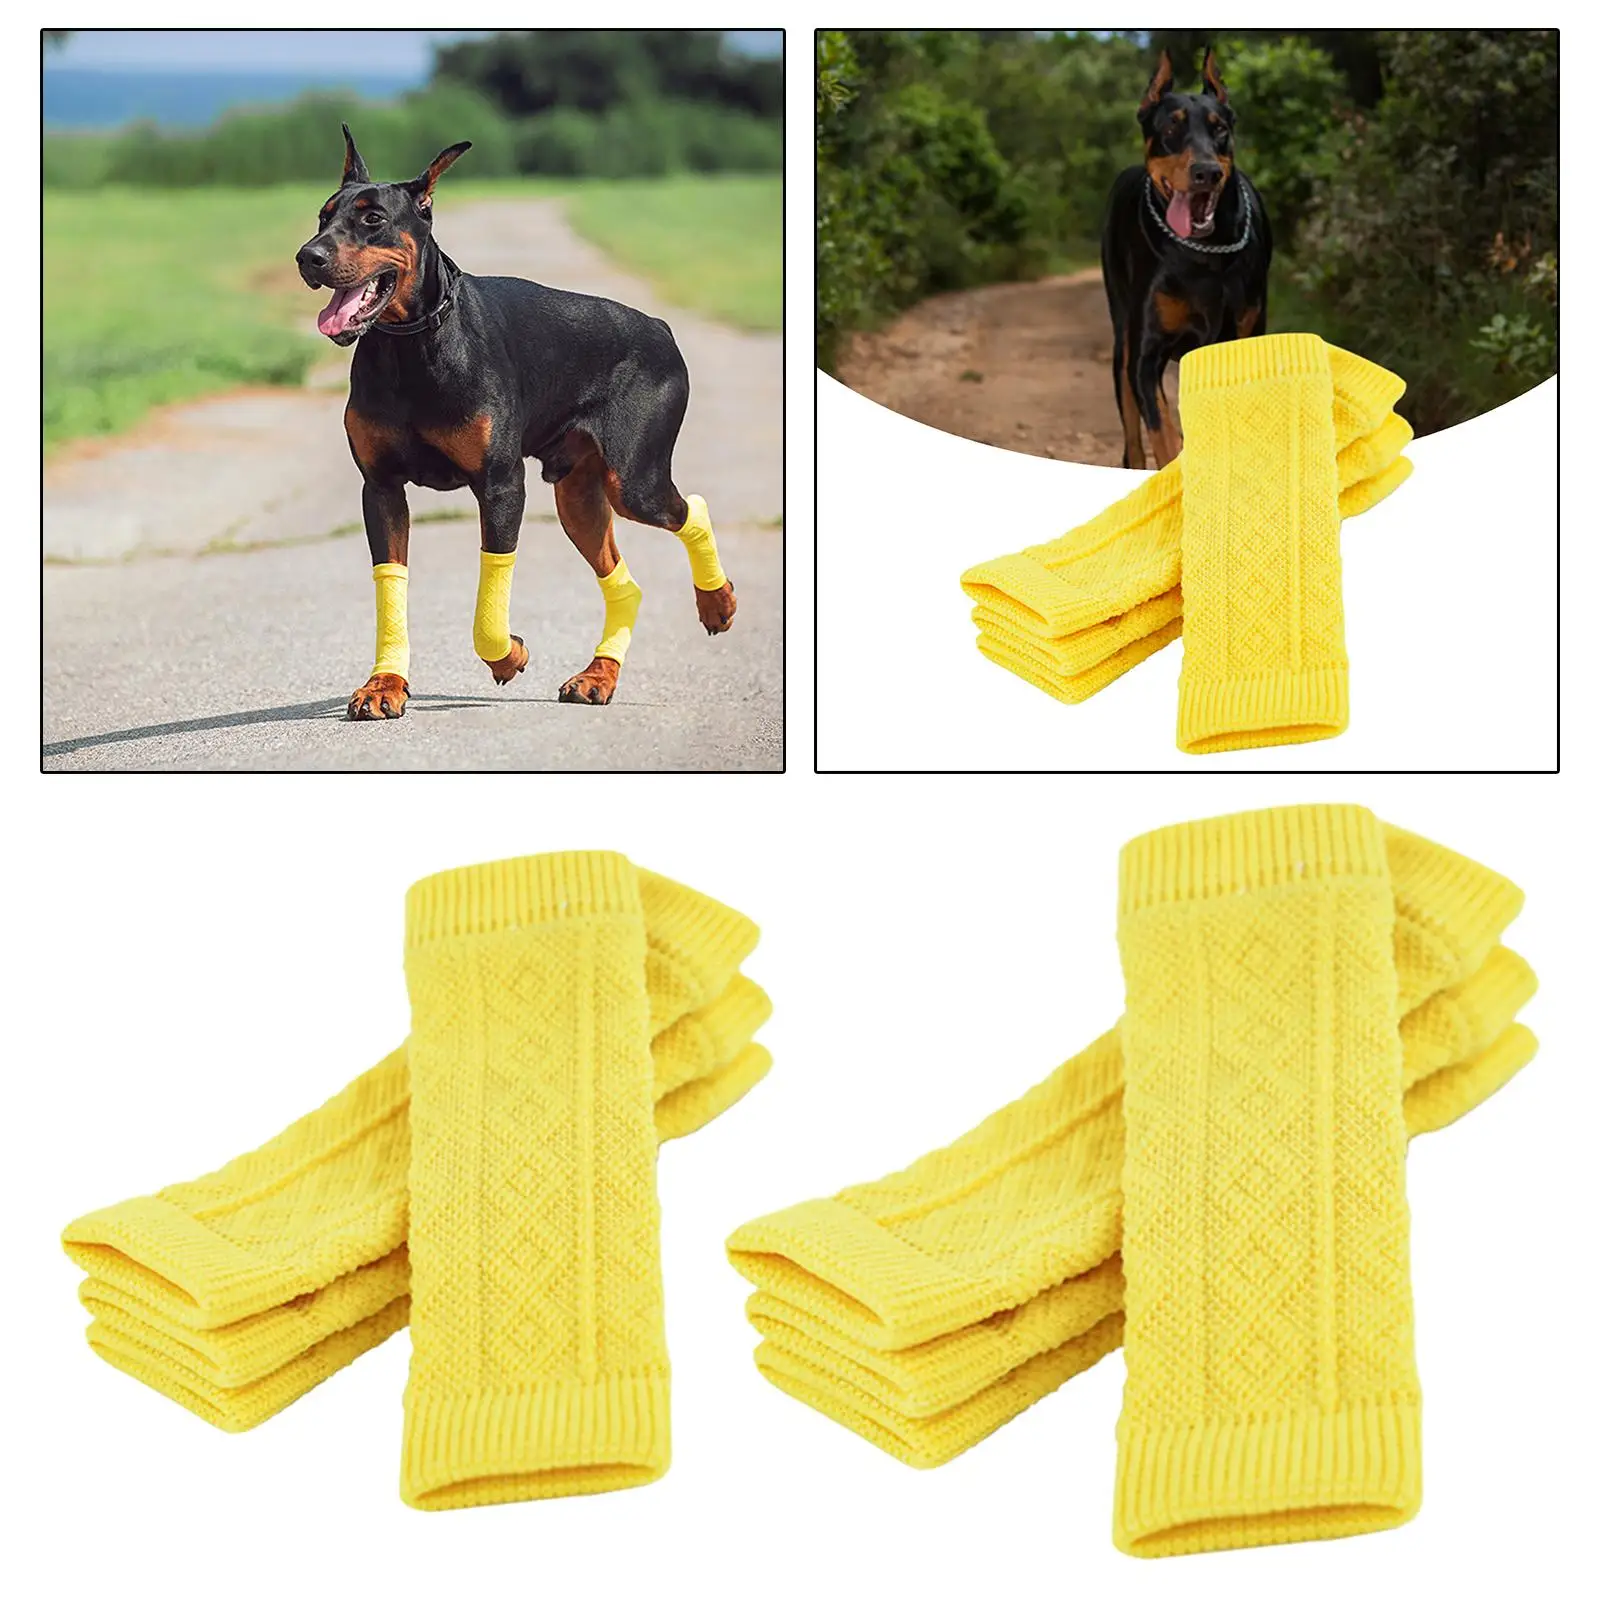 4 Pieces Nonslip Cotton Sock Cover Doggie Grip Socks Pet Socks for Hot/Cold Pavement Small Medium Large Dogs Hardwood Floor